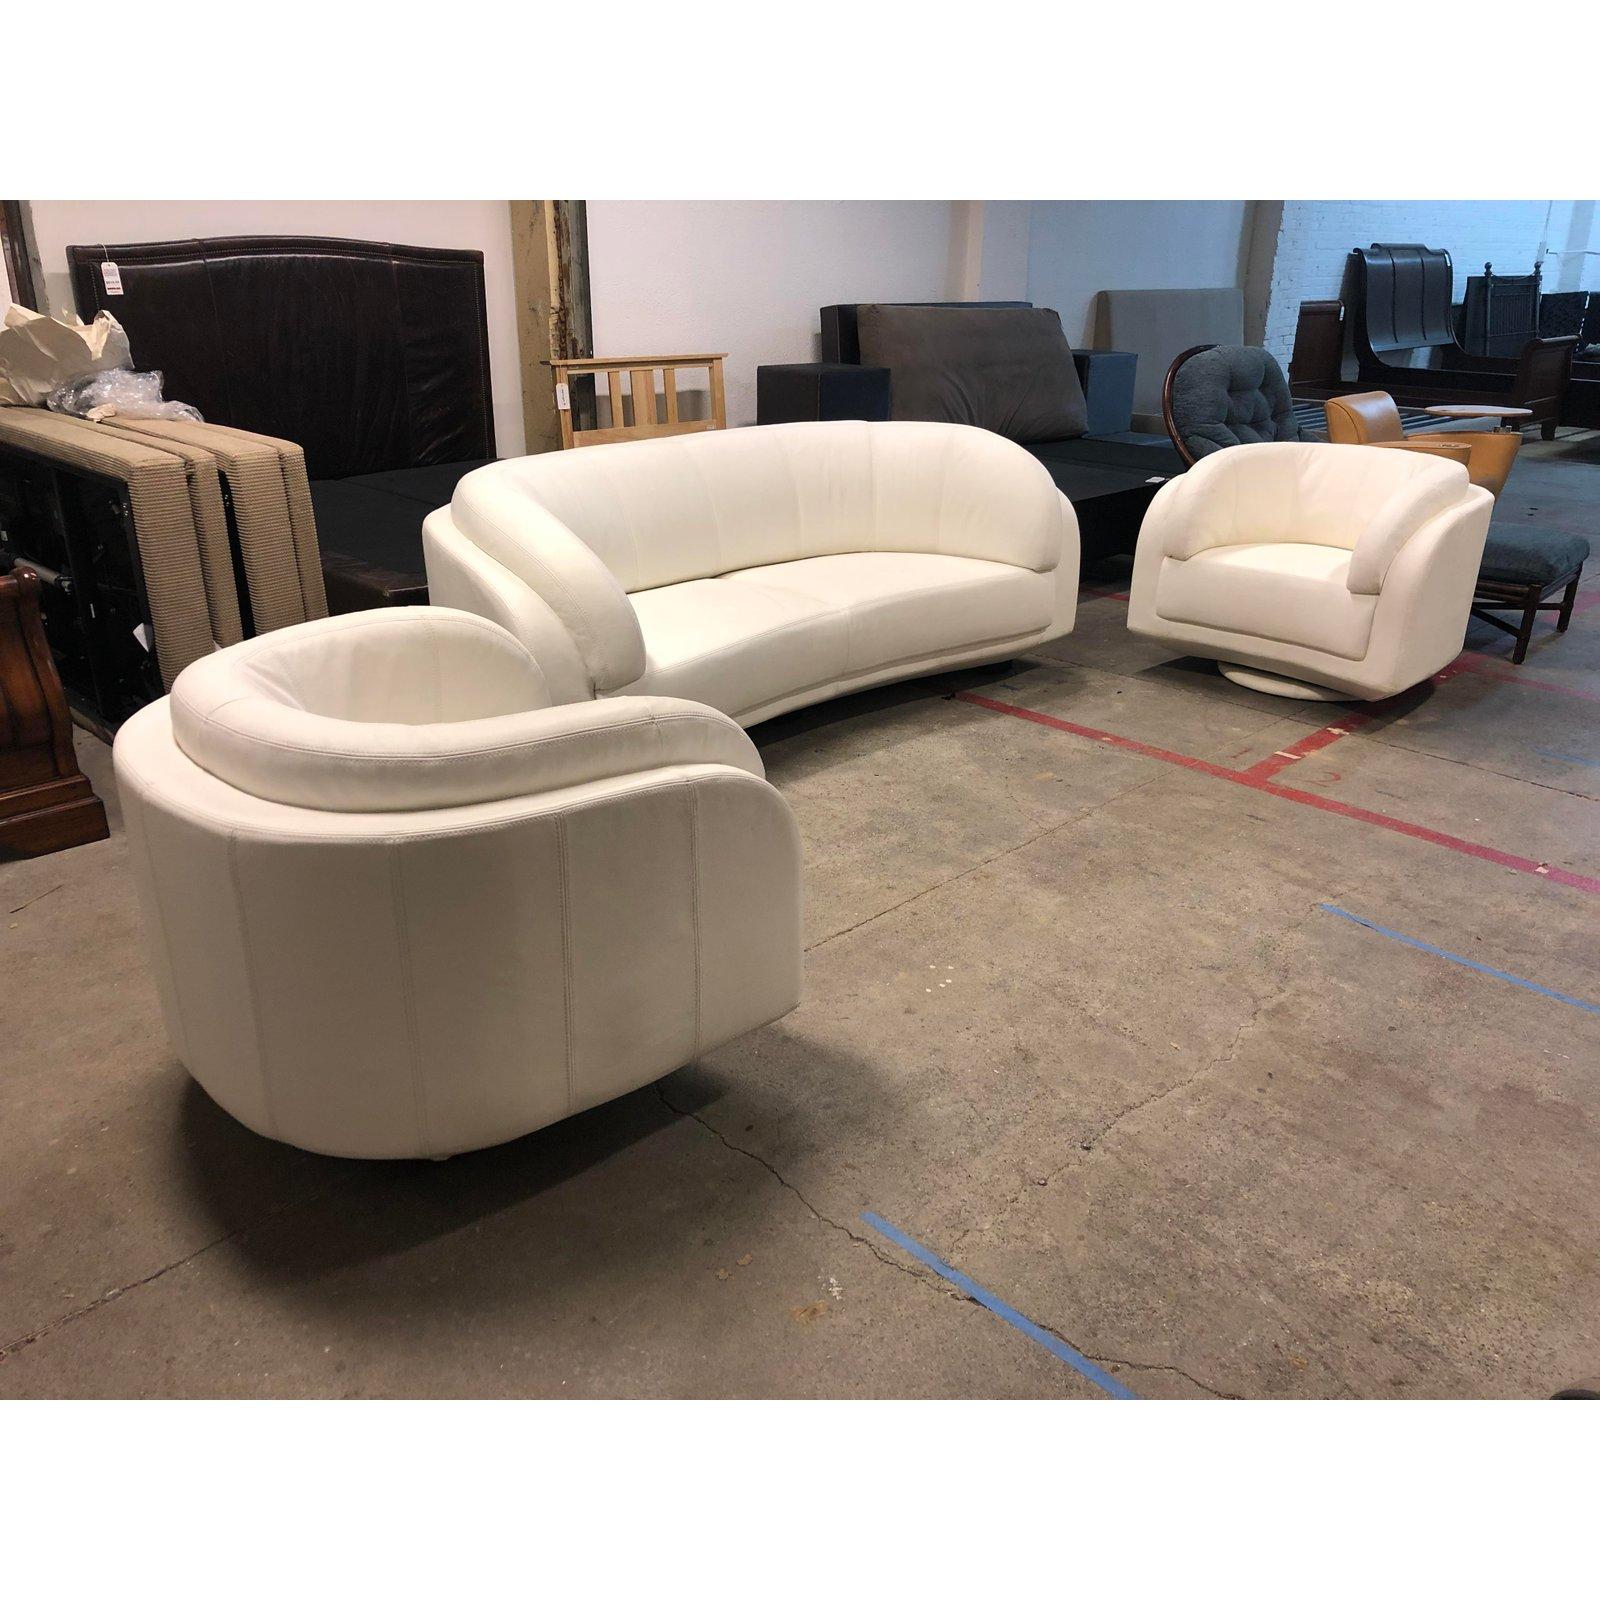 An Arabesque sofa and pair of swivel chairs by W.Schillig, The Arabesque Collection was designed by Fillmore Harty. A curvaceous sofa that envelopes in comfort and surrounds the seater in style. A unique cantilever base creates a light, floating